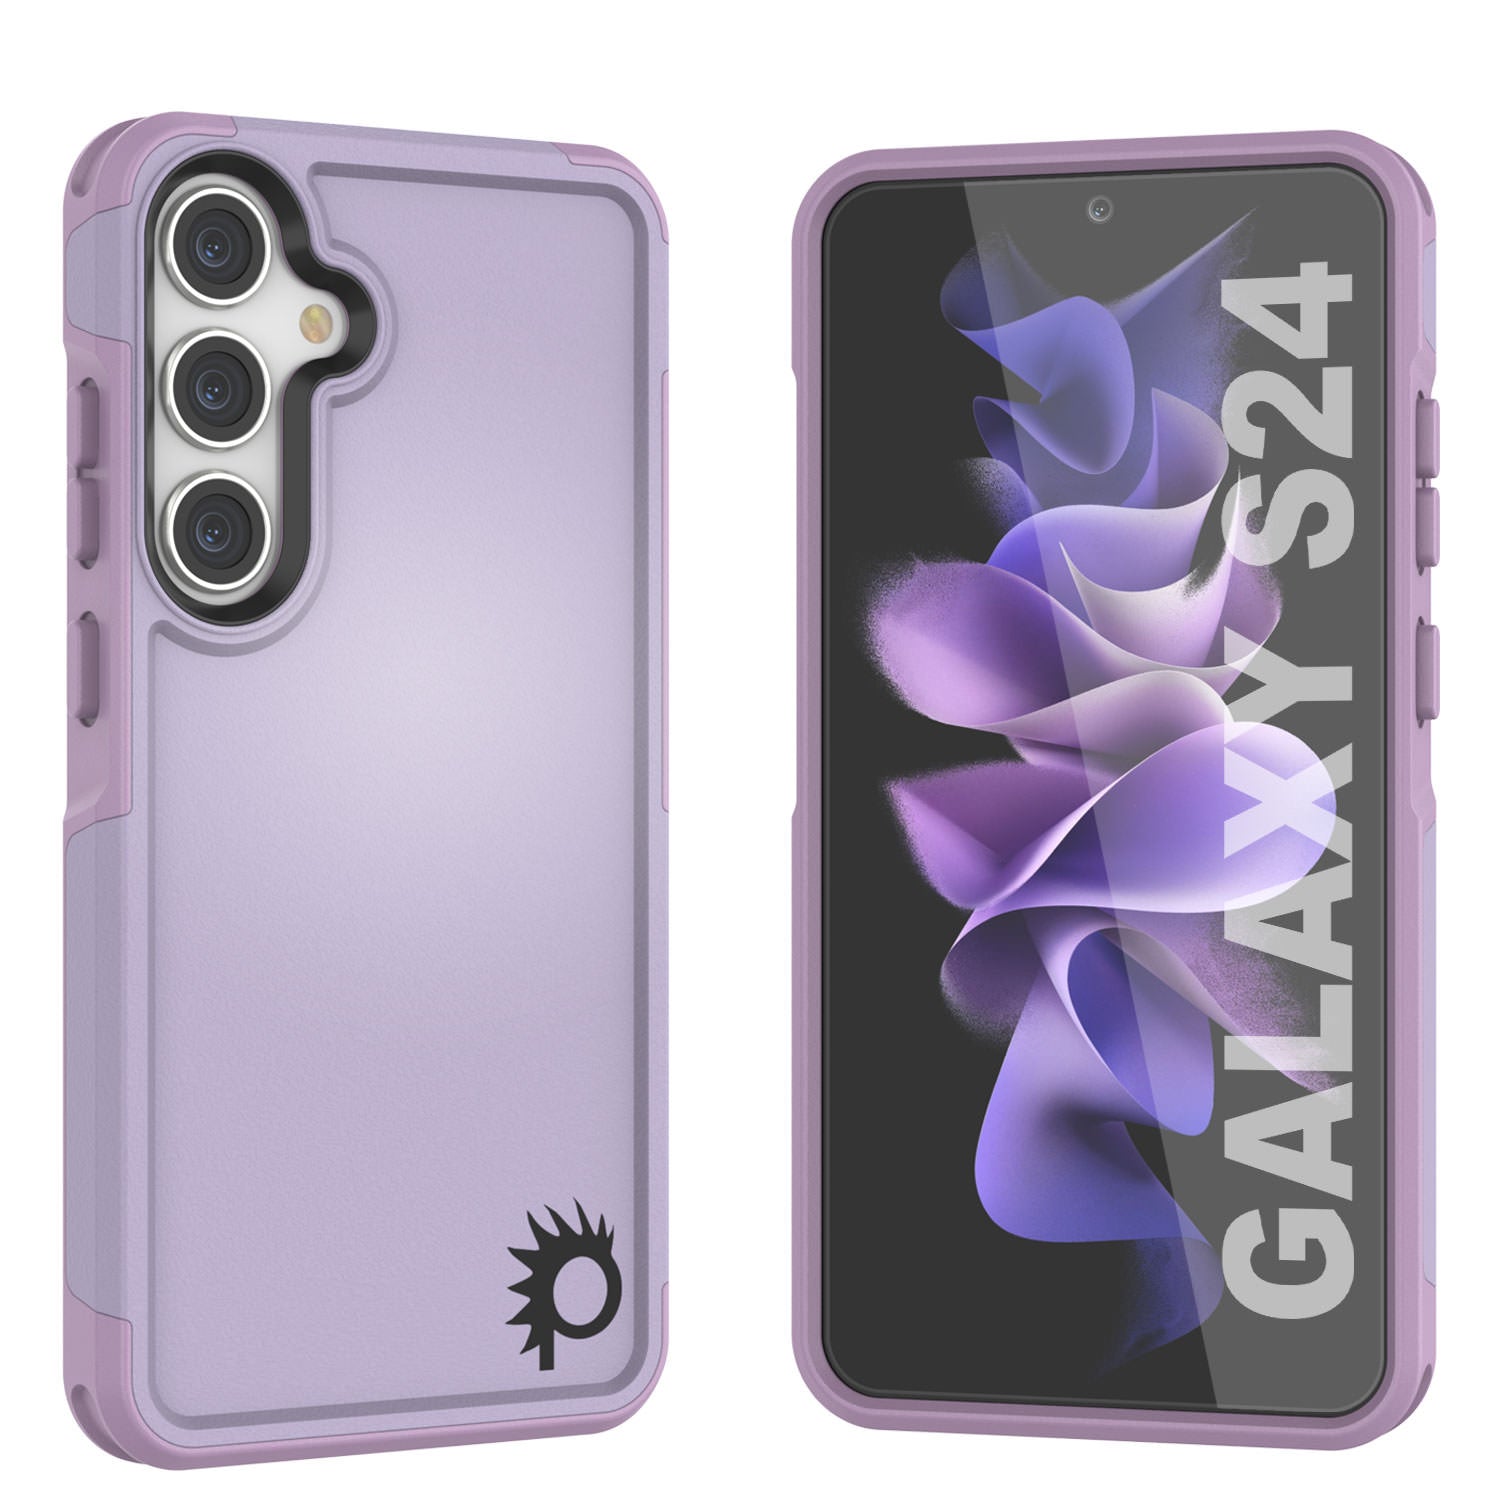 PunkCase Galaxy S24 Case, [Spartan 2.0 Series] Clear Rugged Heavy Duty Cover [Lilac]